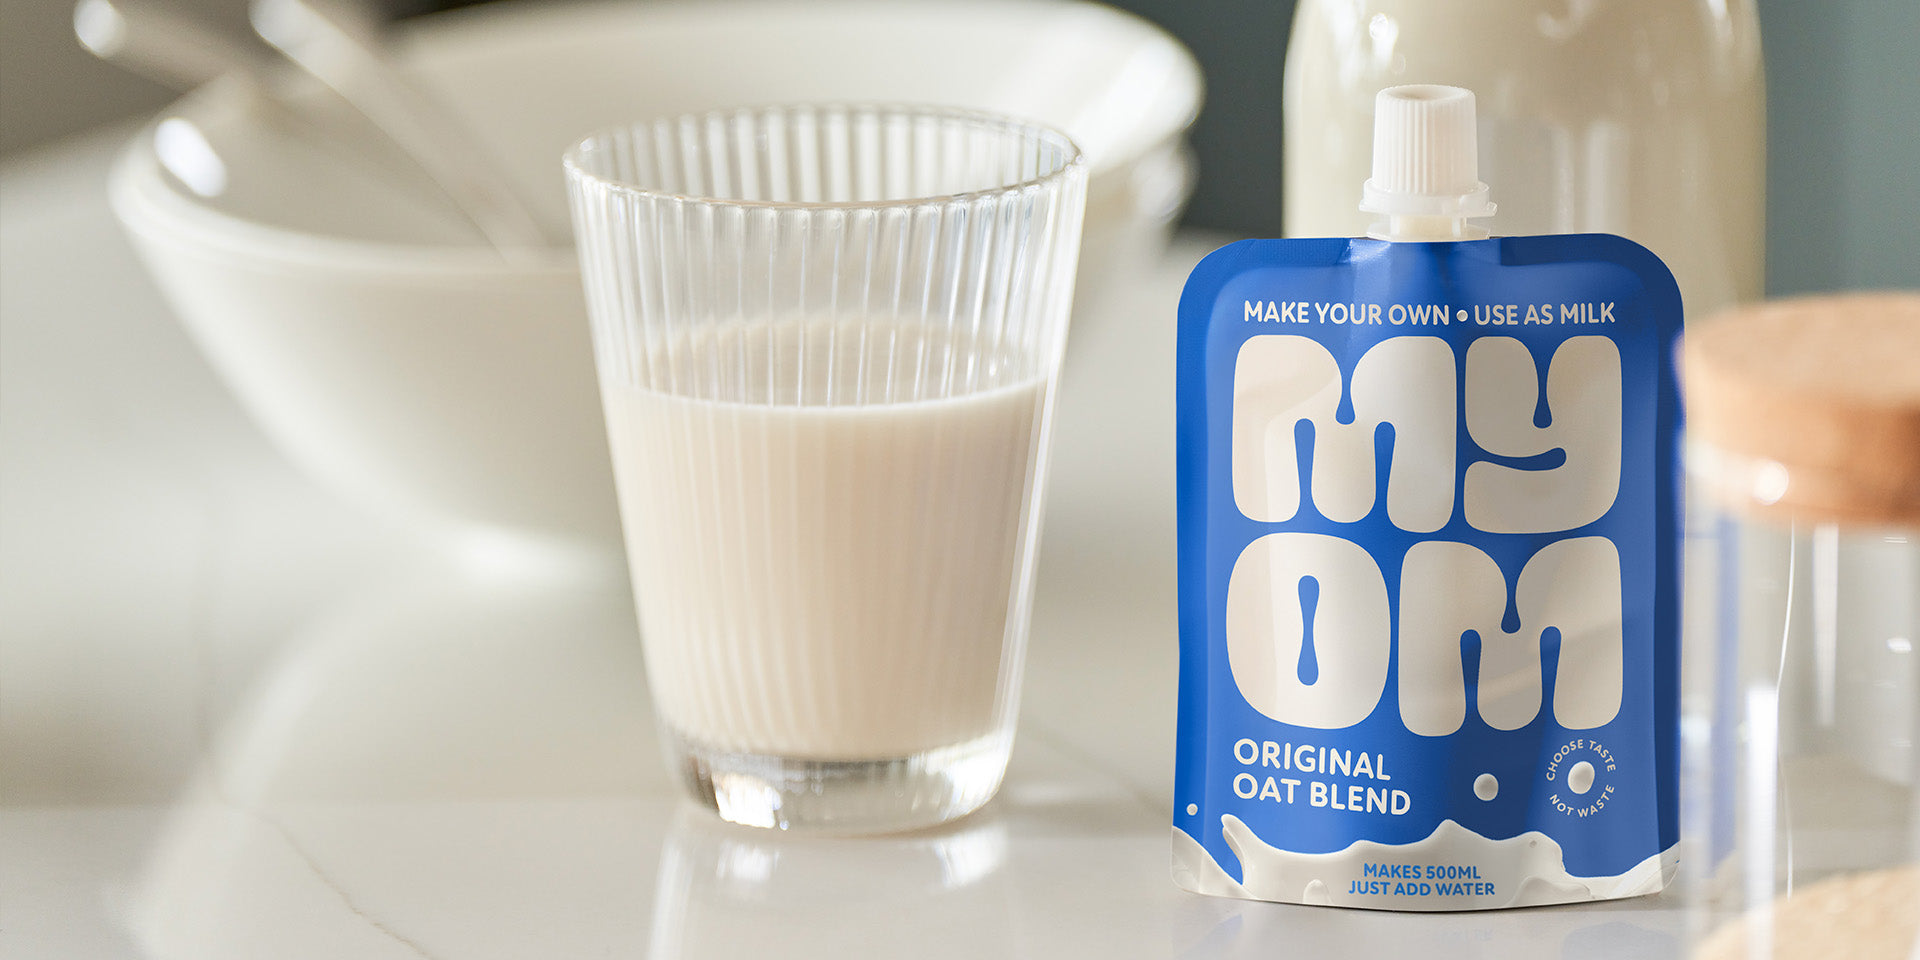 MYOM product make your own milk